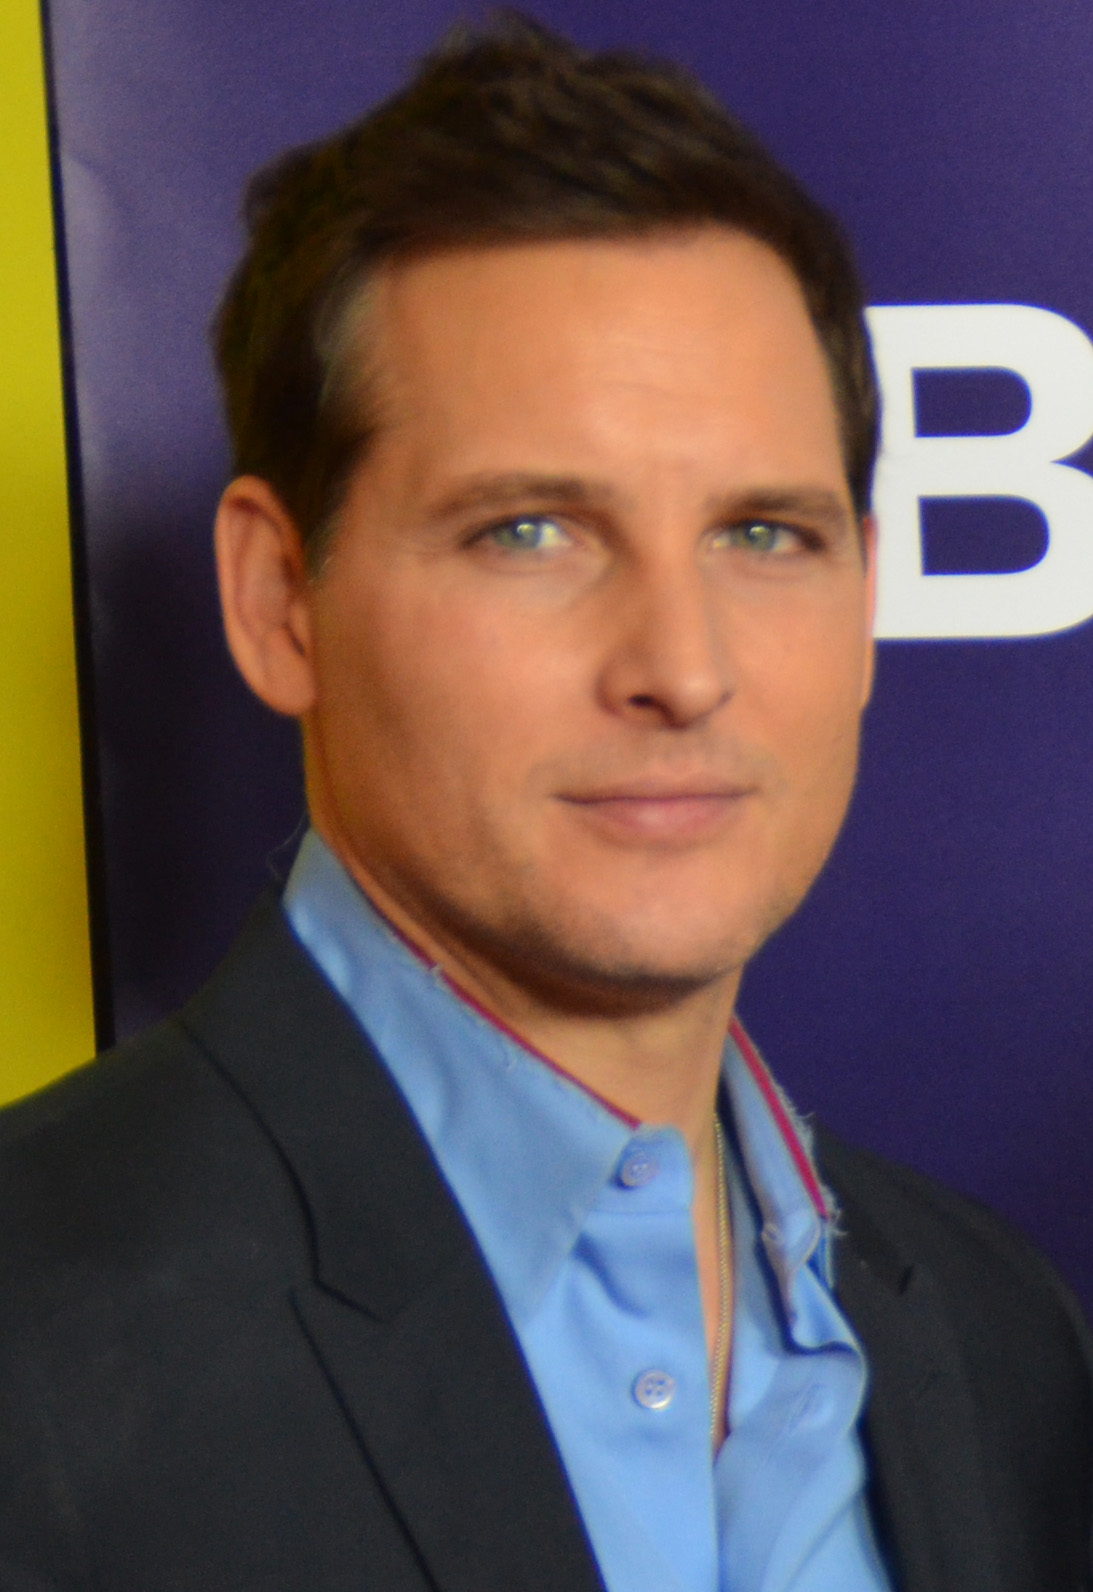 peter facinelli movies and tv shows glee